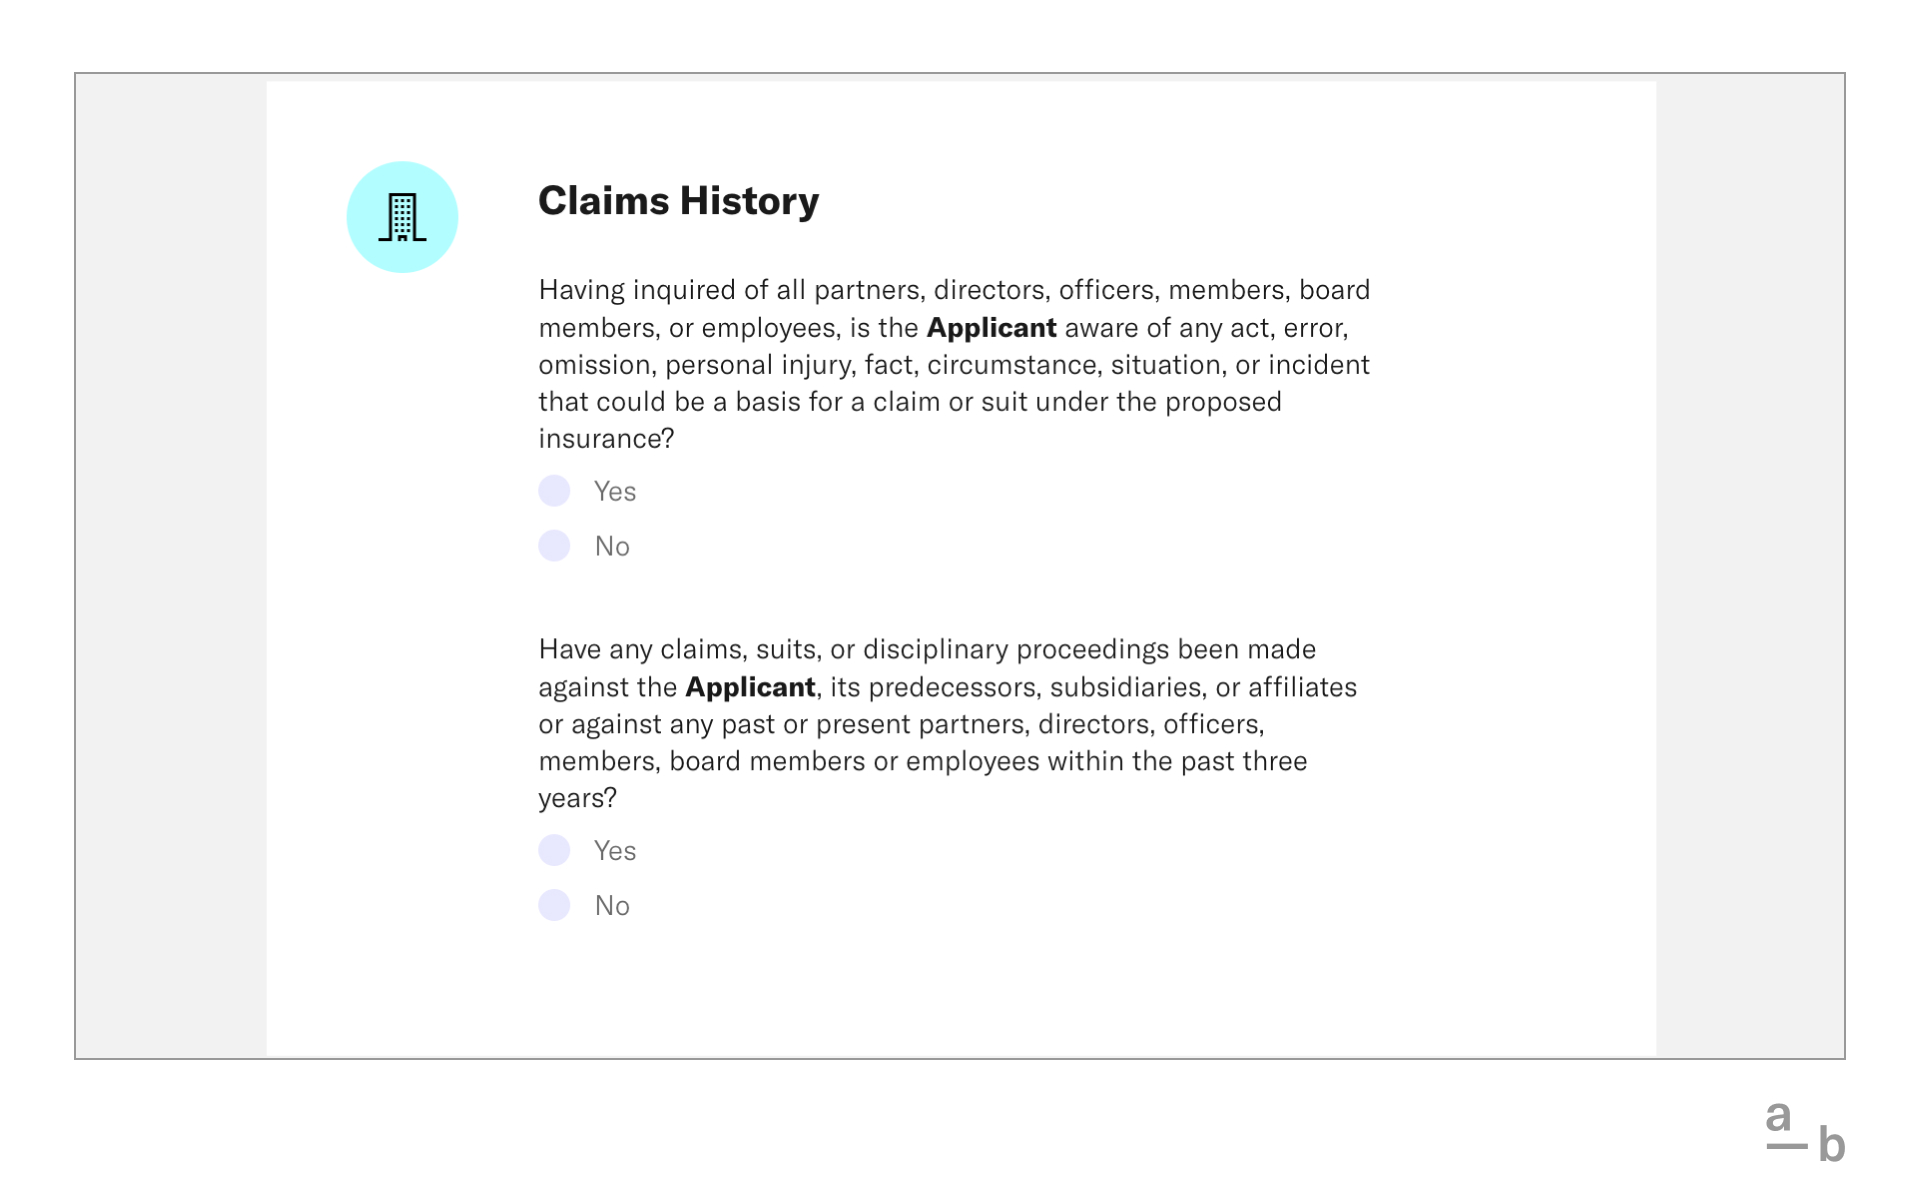 screenshot of claims history questions